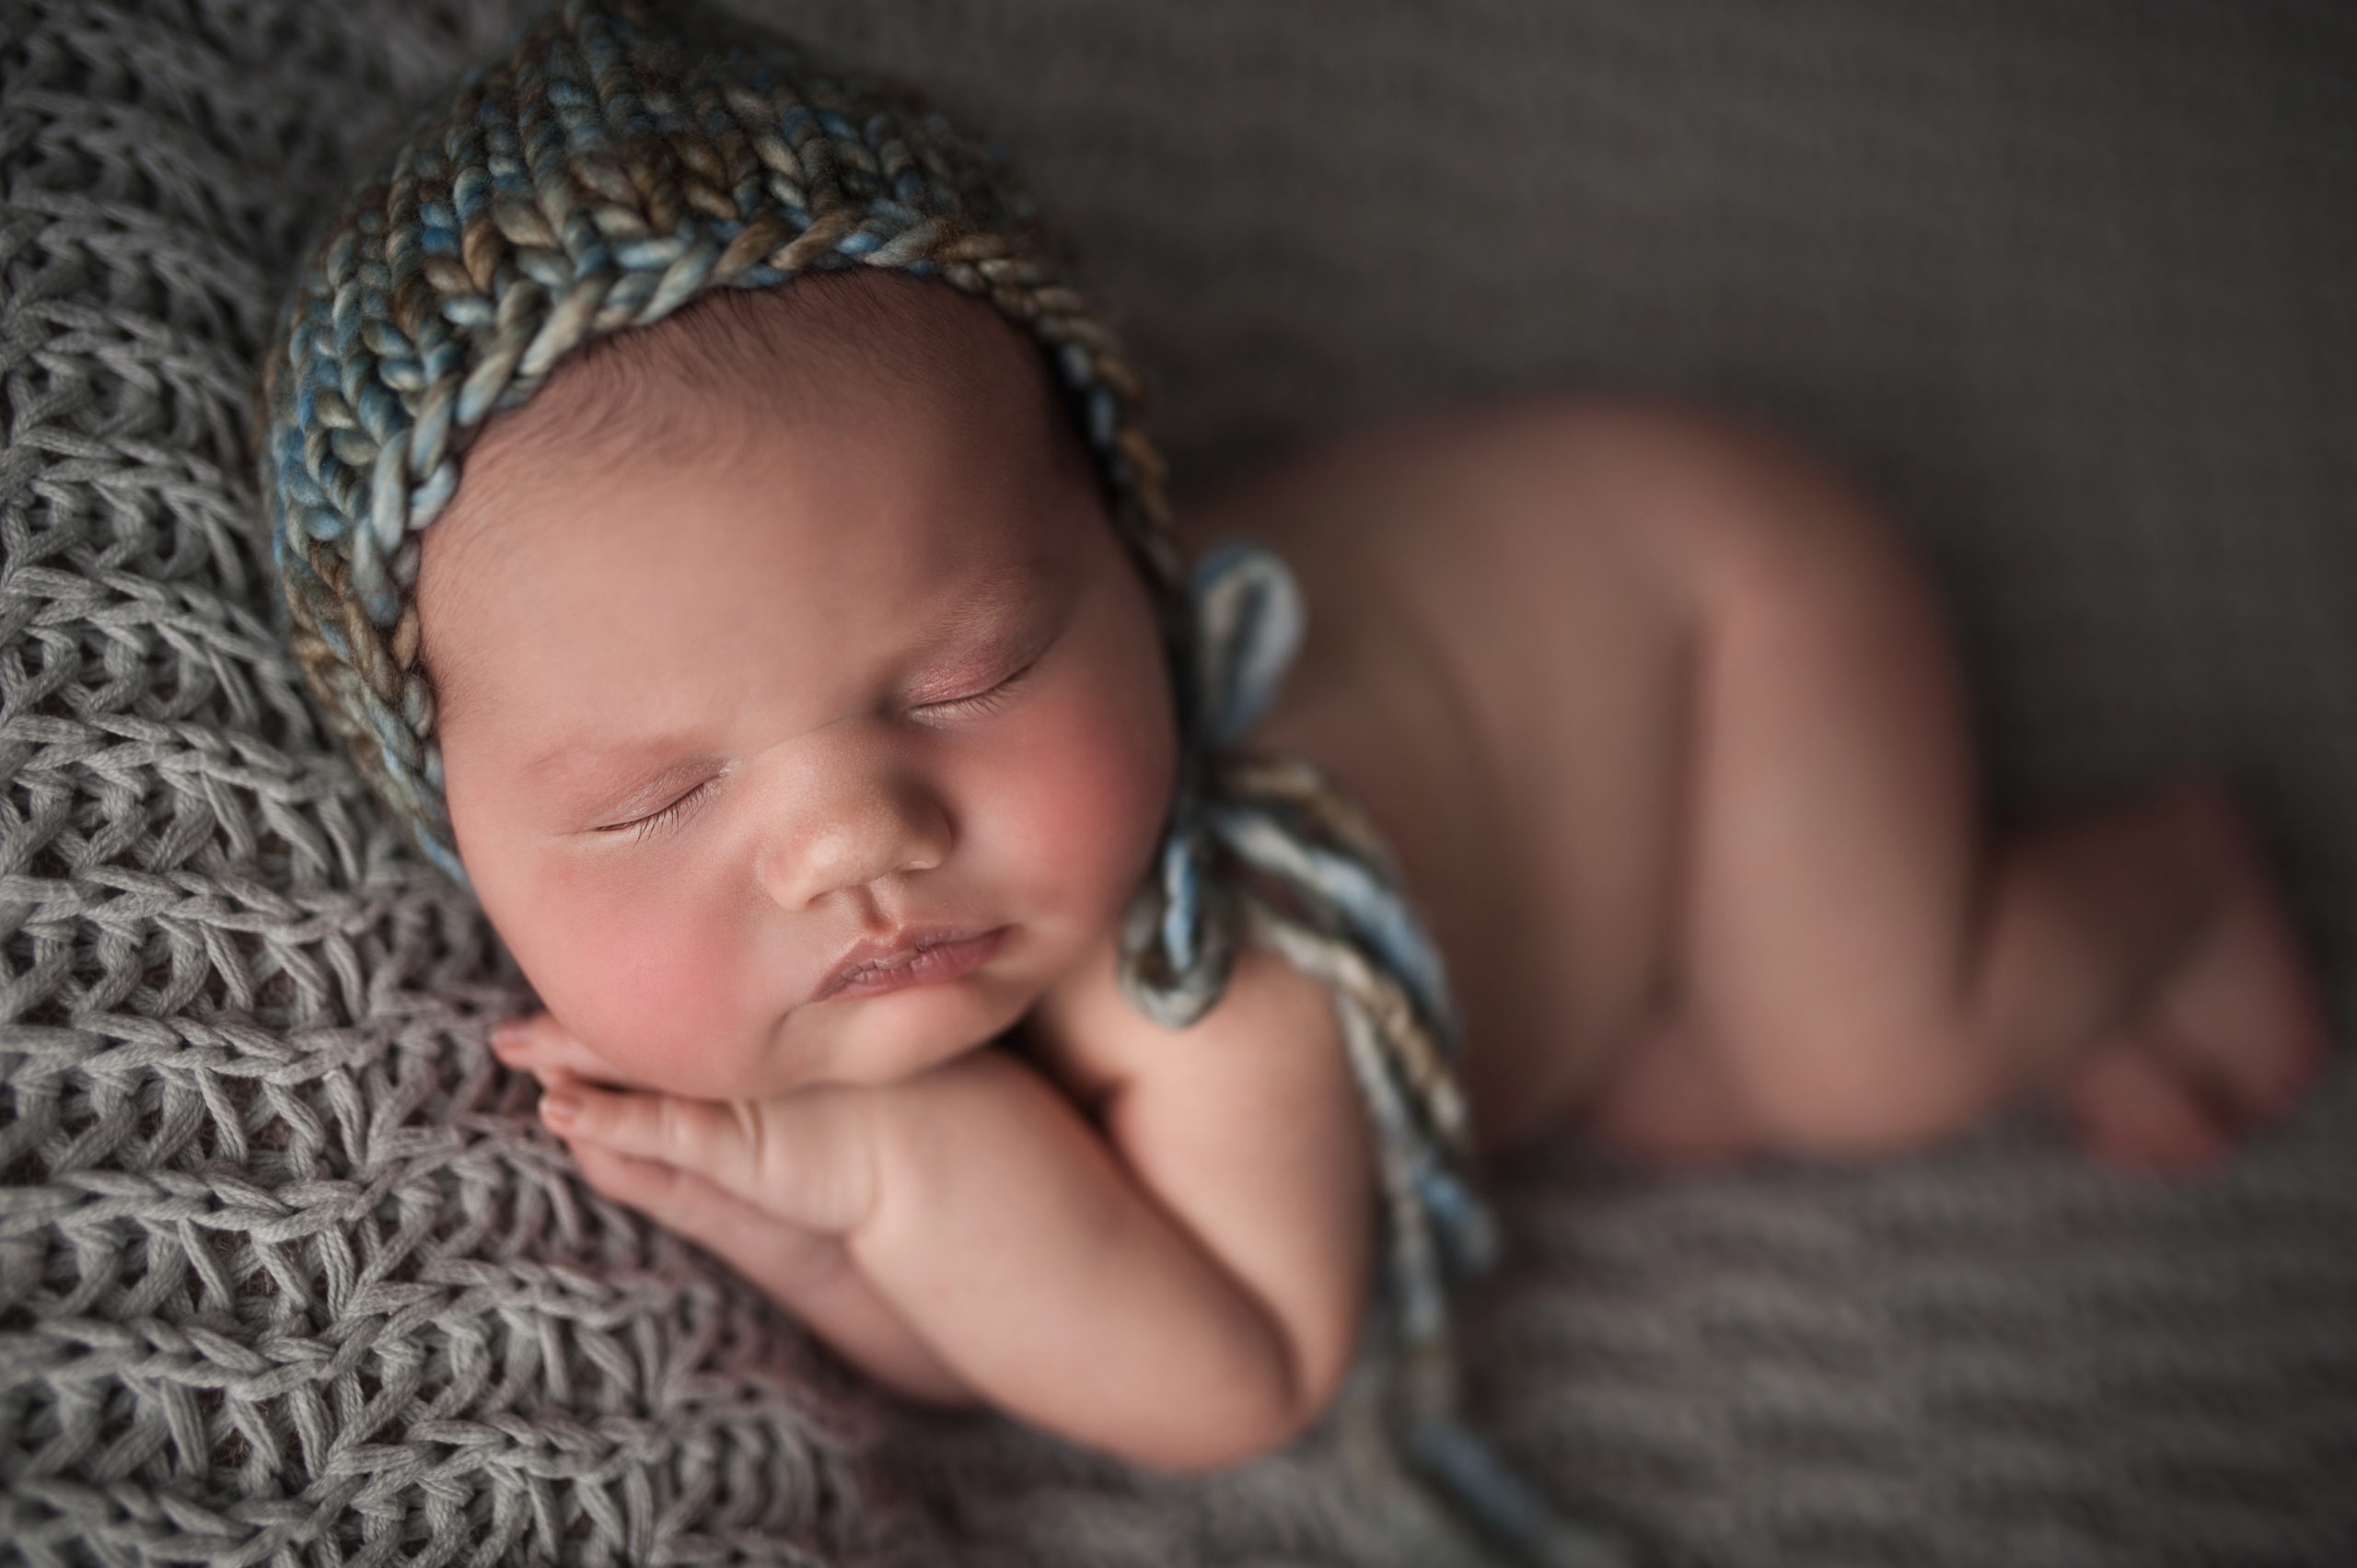 Newborn Photo of Baby laying on his side on a blue blanket with hands folded. Photographer Angela McNaul